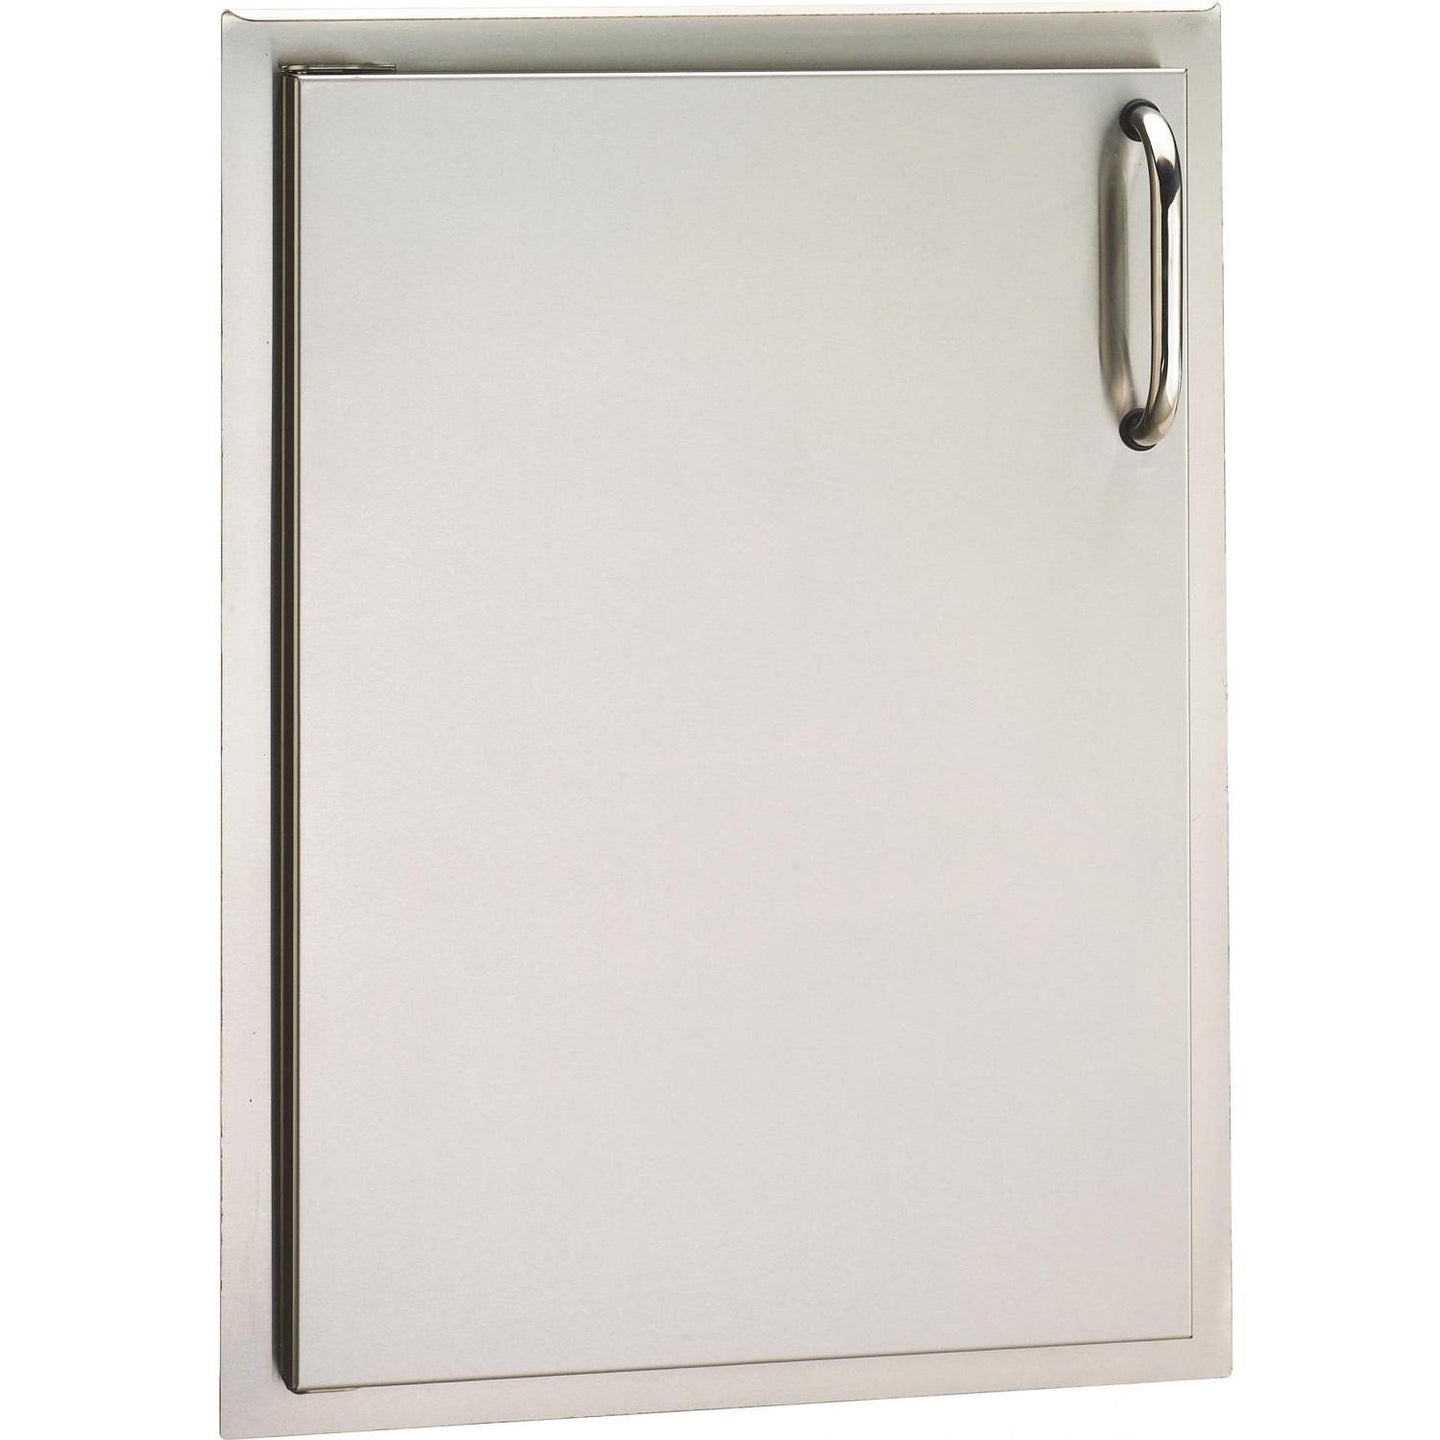 Fire Magic Select 14-Inch Left-Hinged Single Access Door - Vertical - 33920-SL - The Garden District